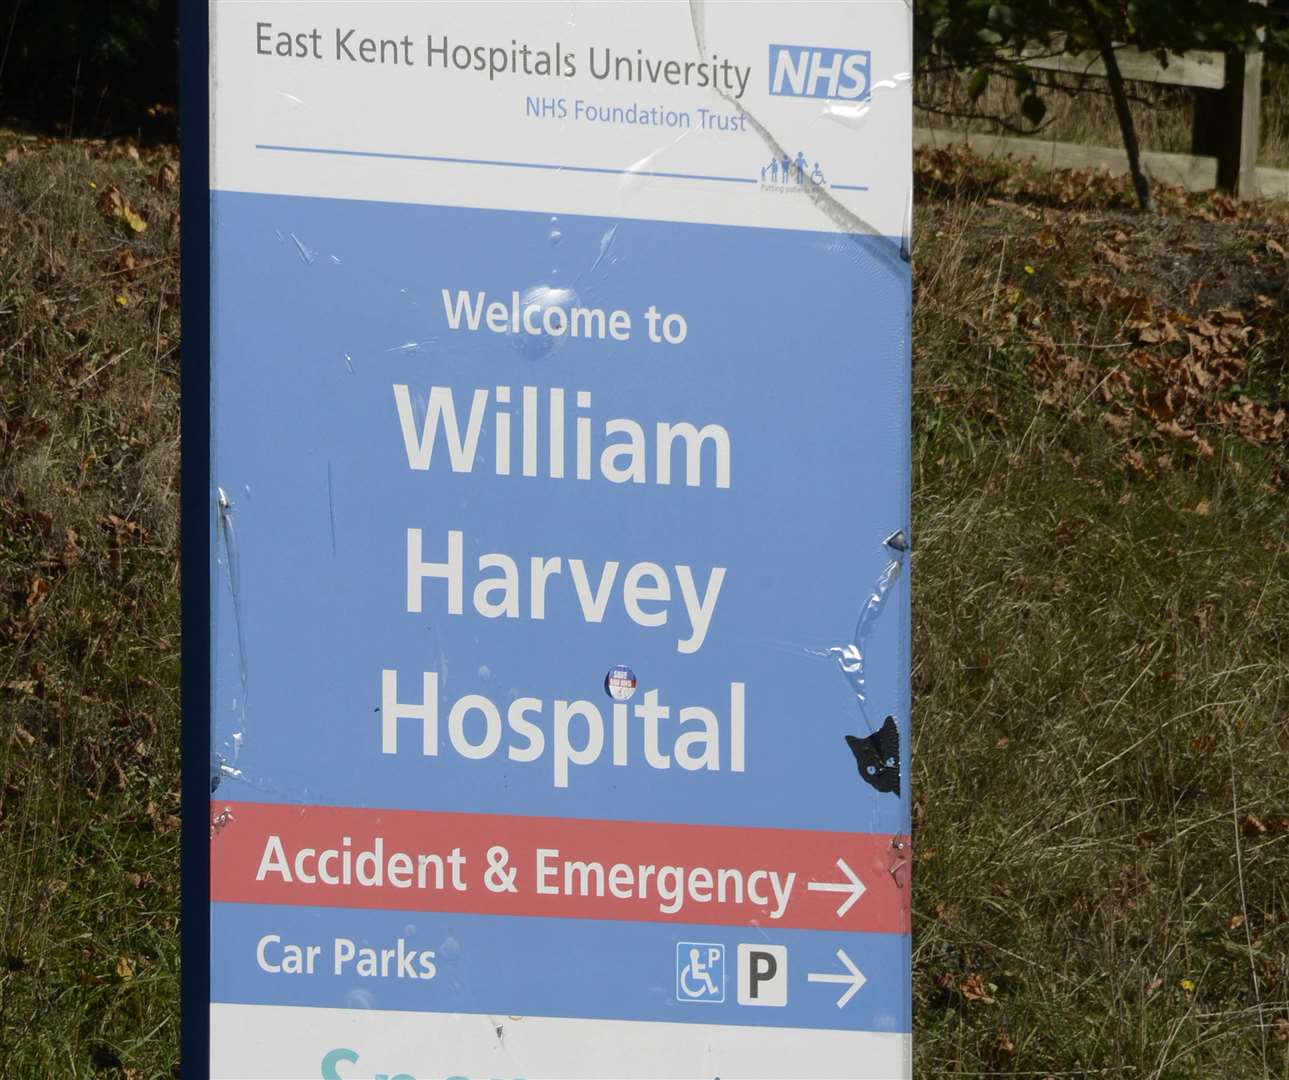 The meeting took place at Ashford's William Harvey Hospital.Picture: Paul Amos